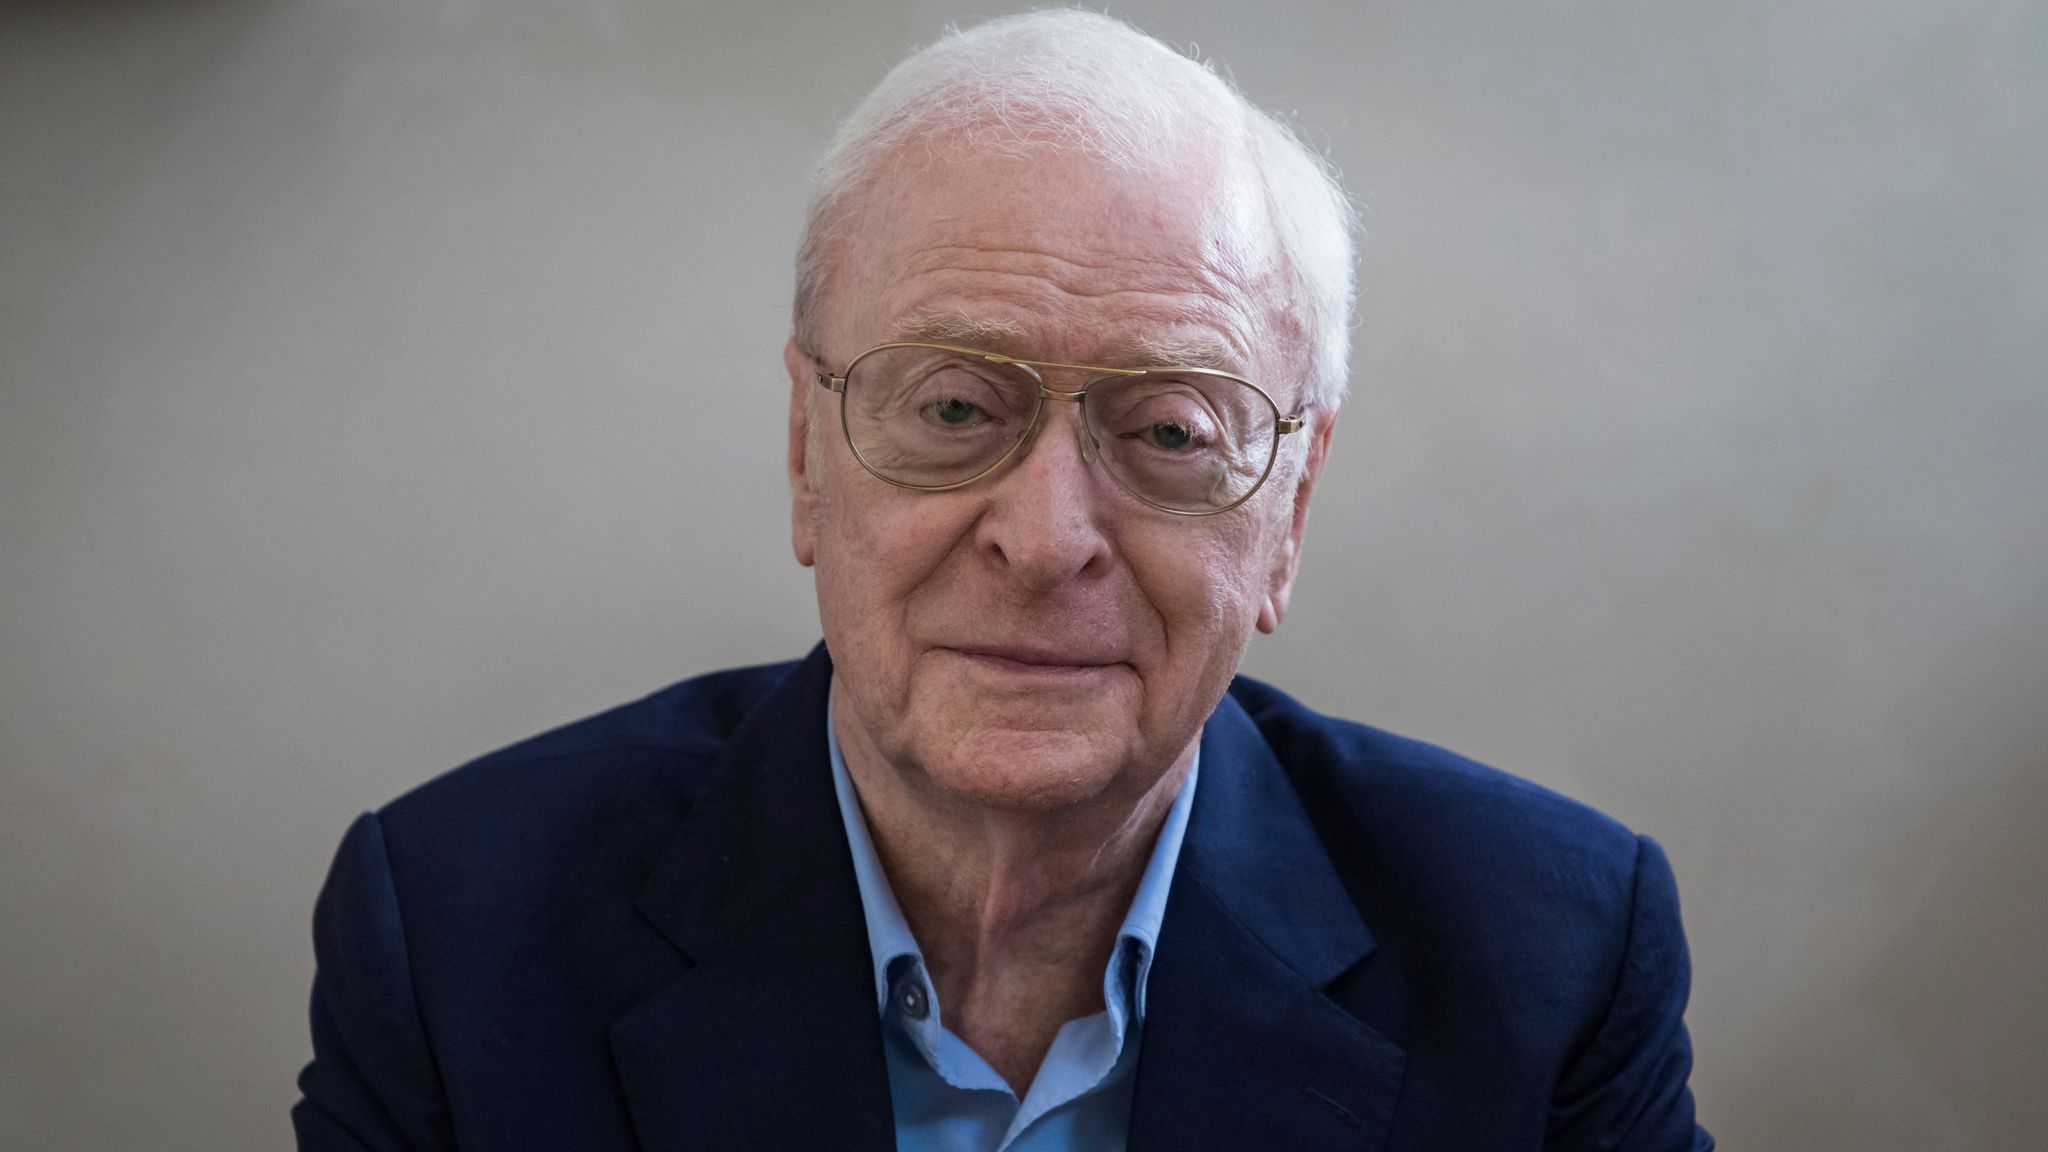 Michael Caine Announces Retirement From Acting, Says He Can't Beat